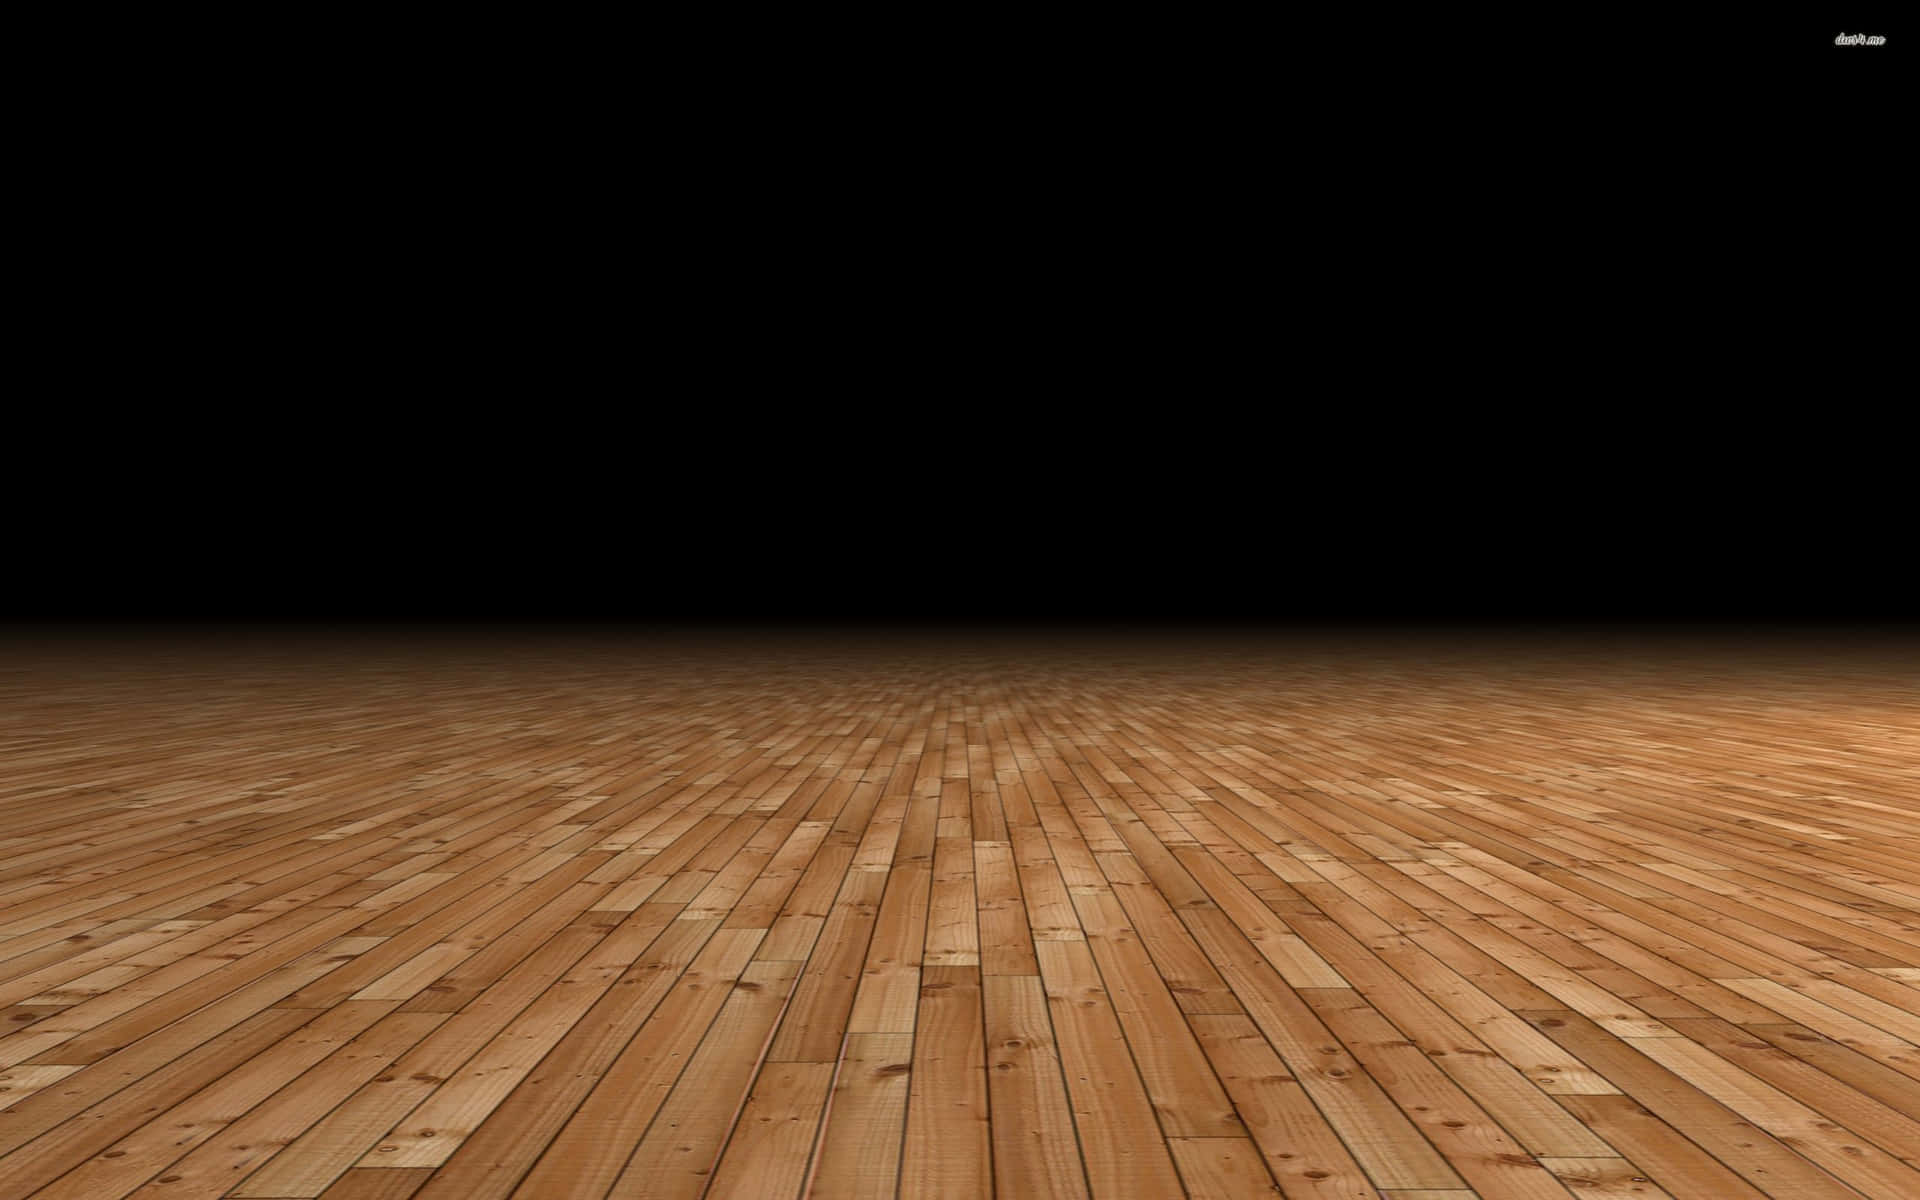 A Wooden Floor With Black Background